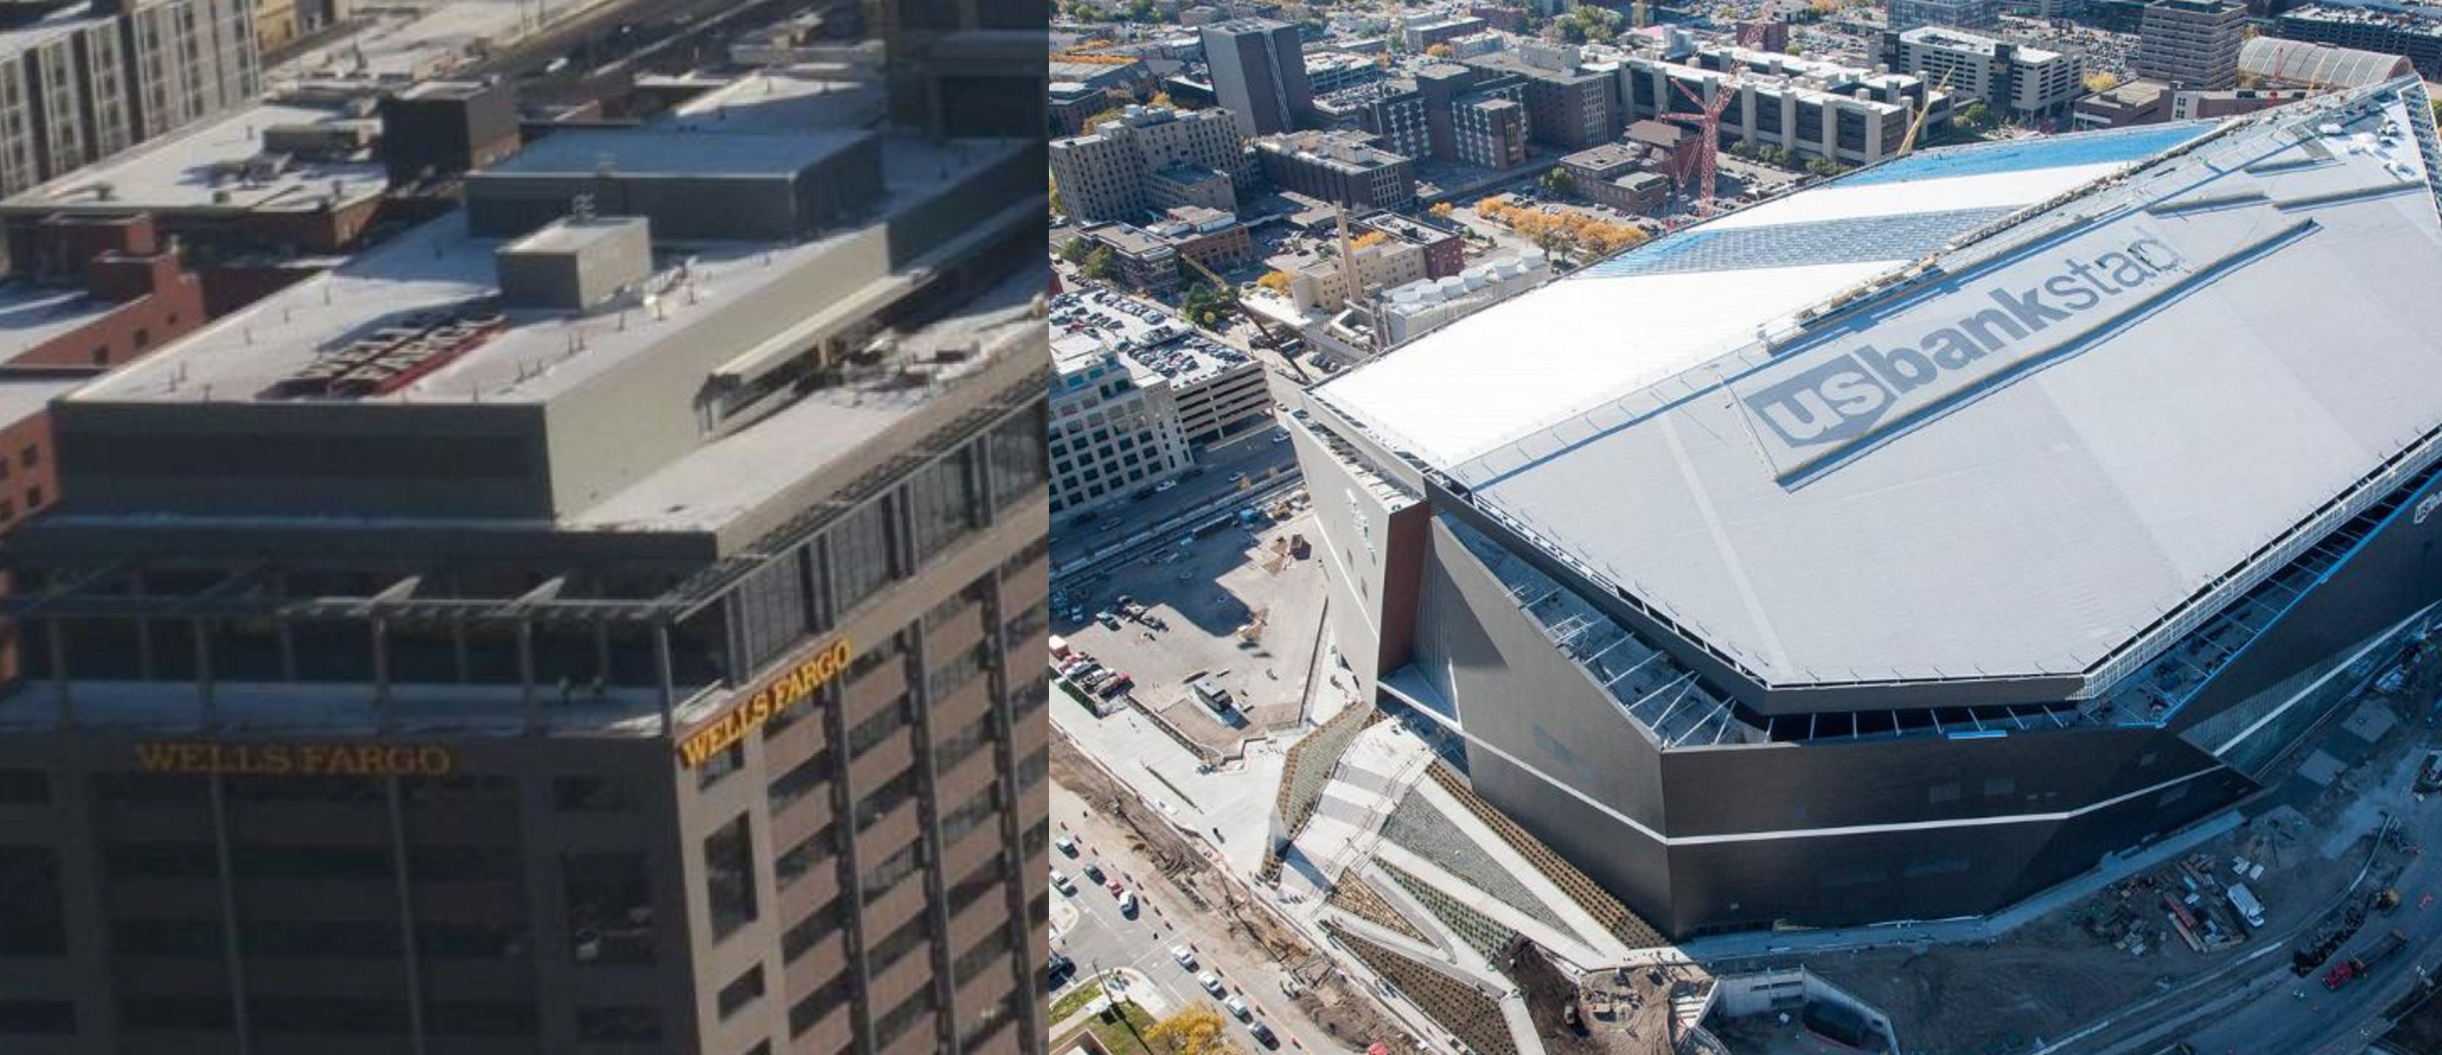 Minnesota Vikings Let Wells Fargo Keep “Photobombing” Rooftop Signs After All